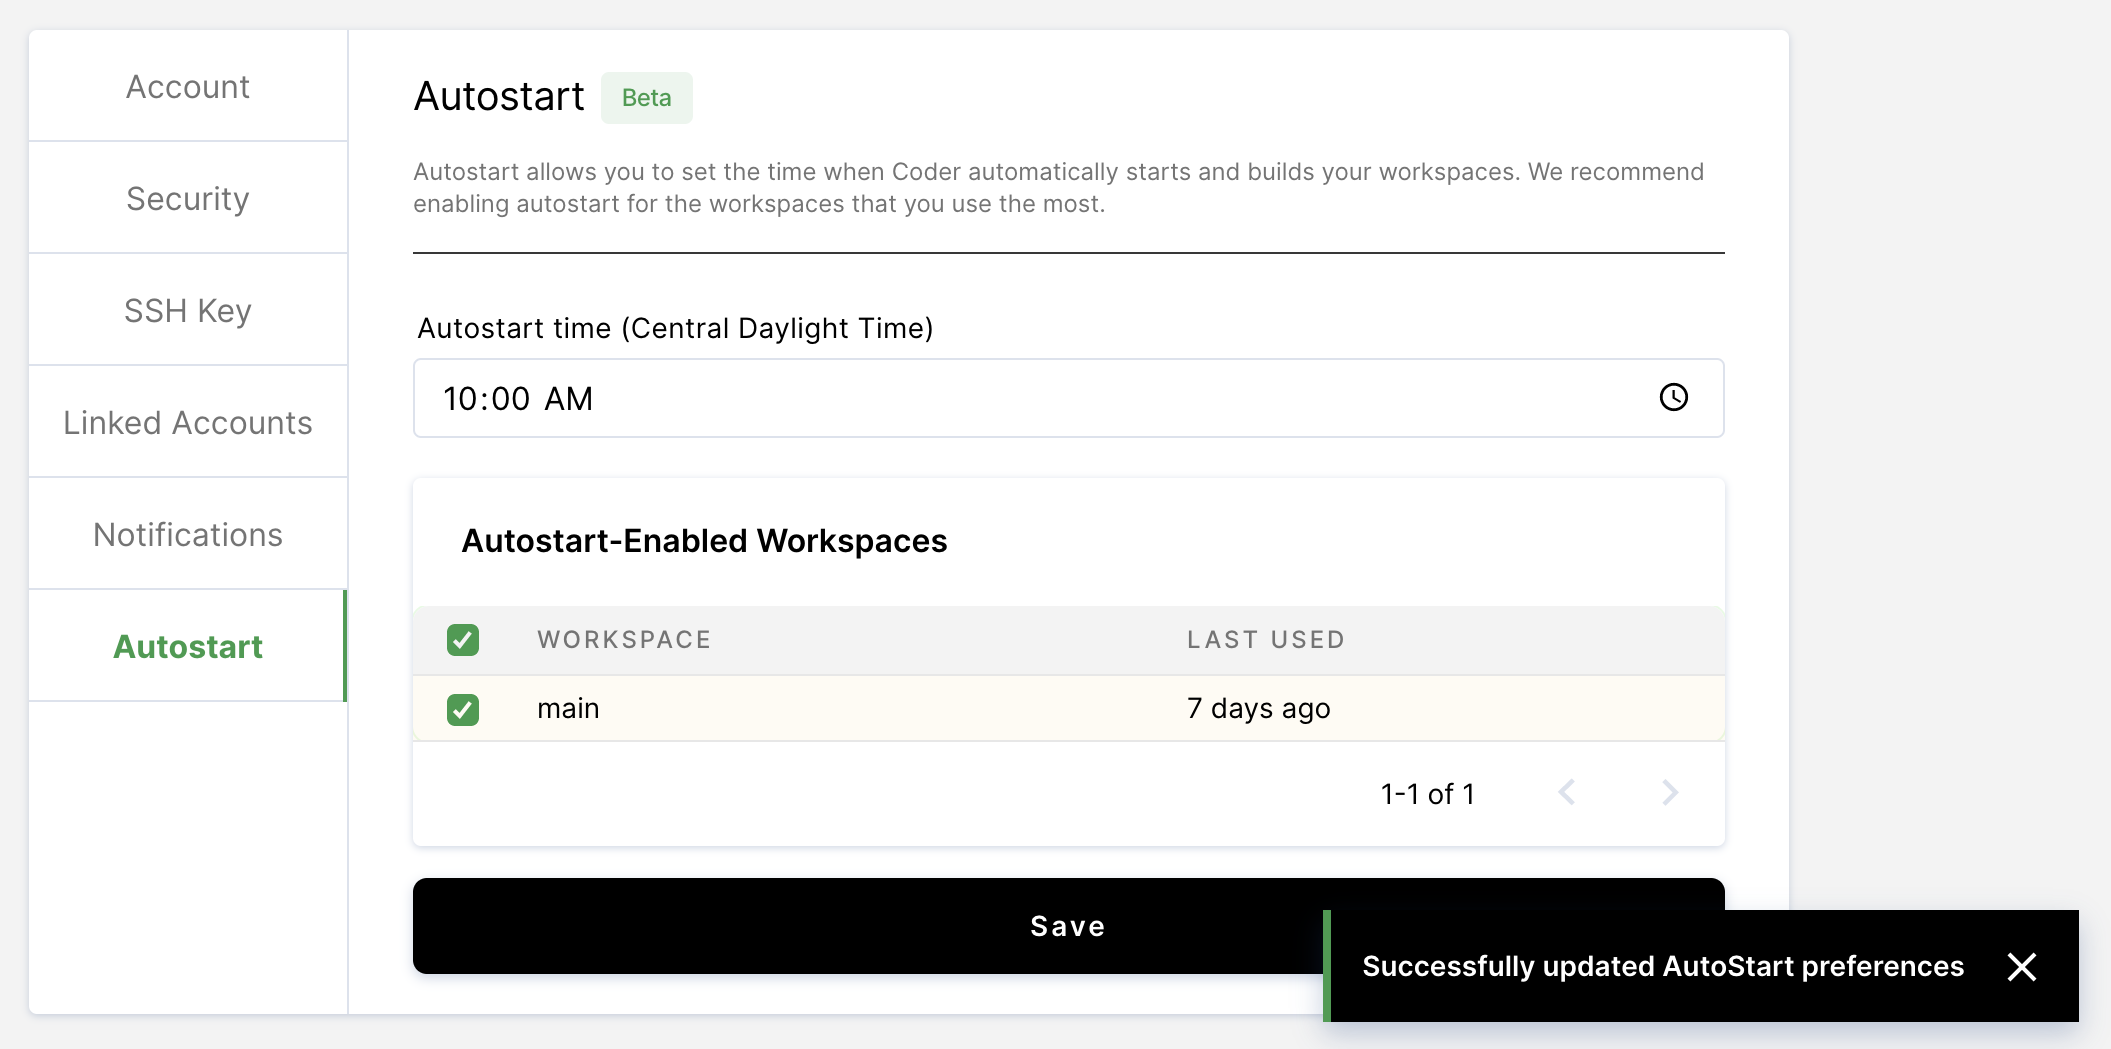 Select workspaces to autostart